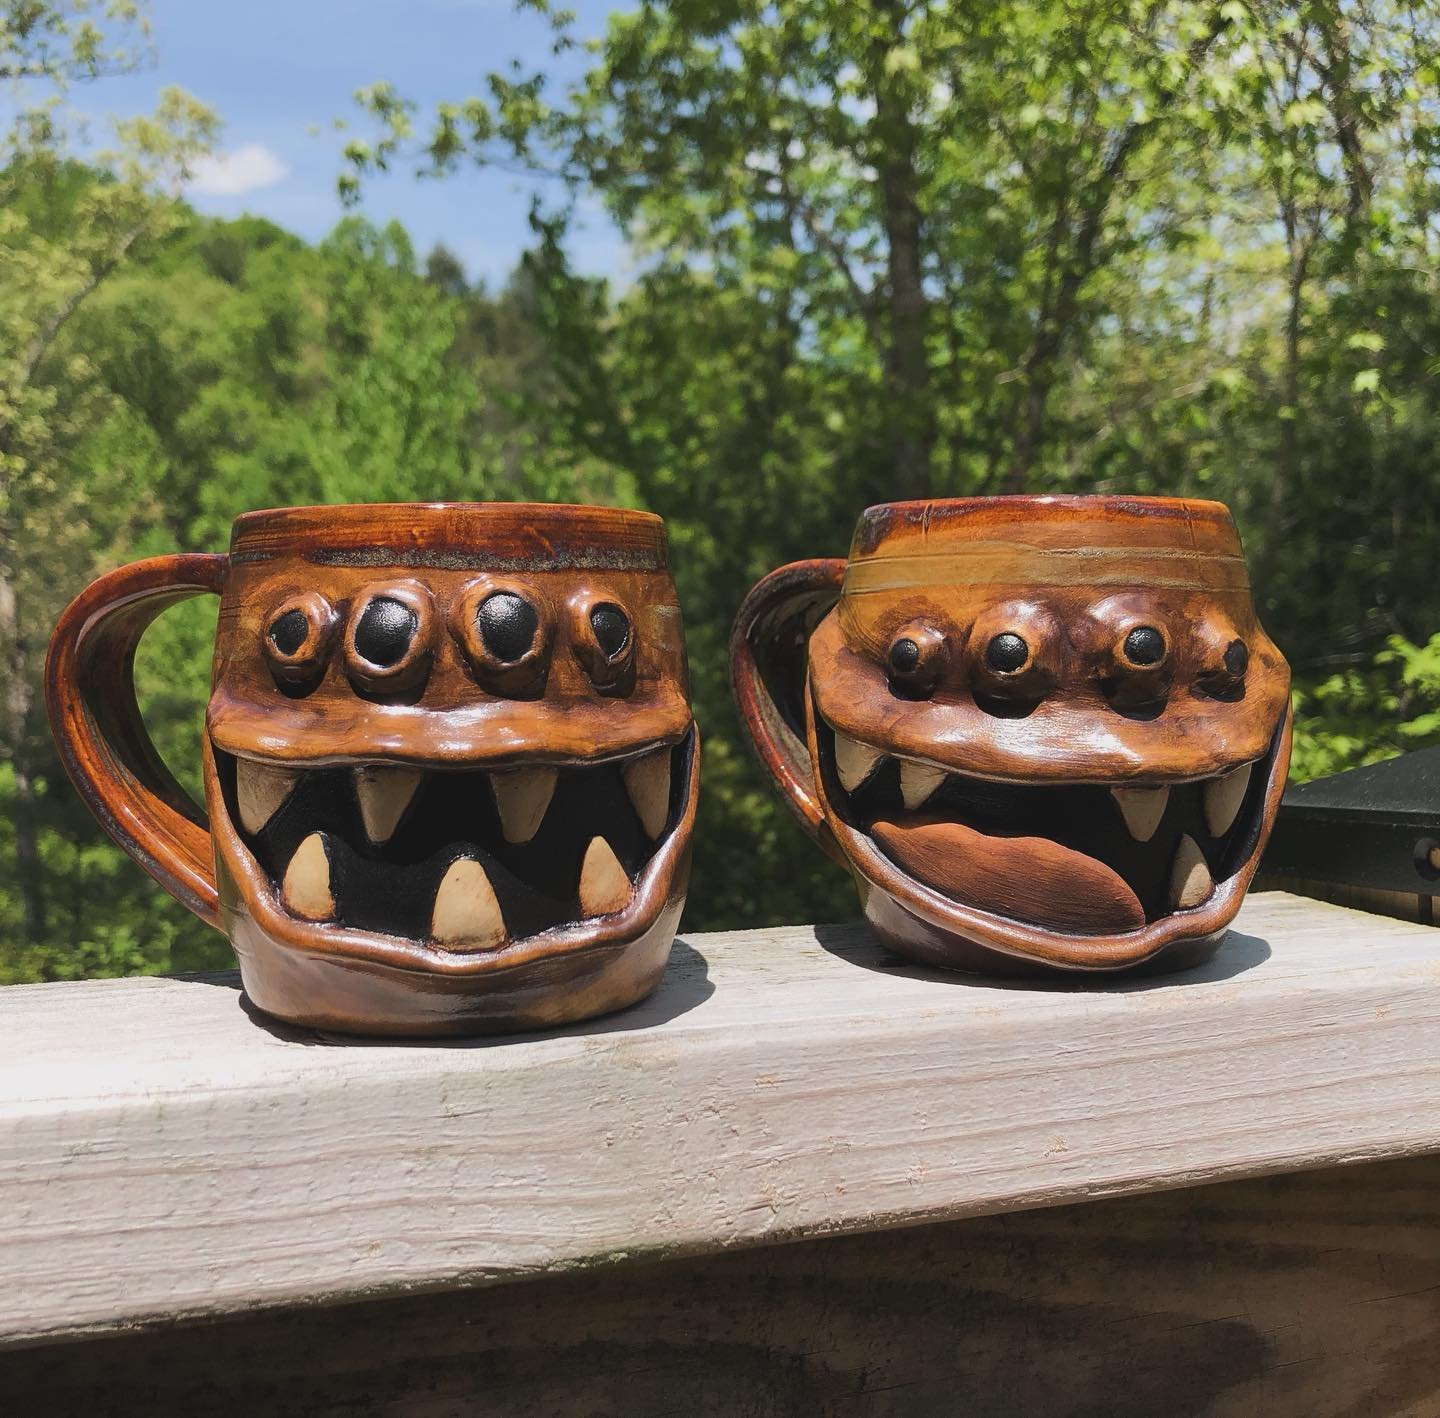 Two mug mimics ready for the Spring Southern Pottery Show! 

Make your way to Gillsville on May 11th to see these mimics and so many more faces!

#pottery #mimic #dungeonsanddragons